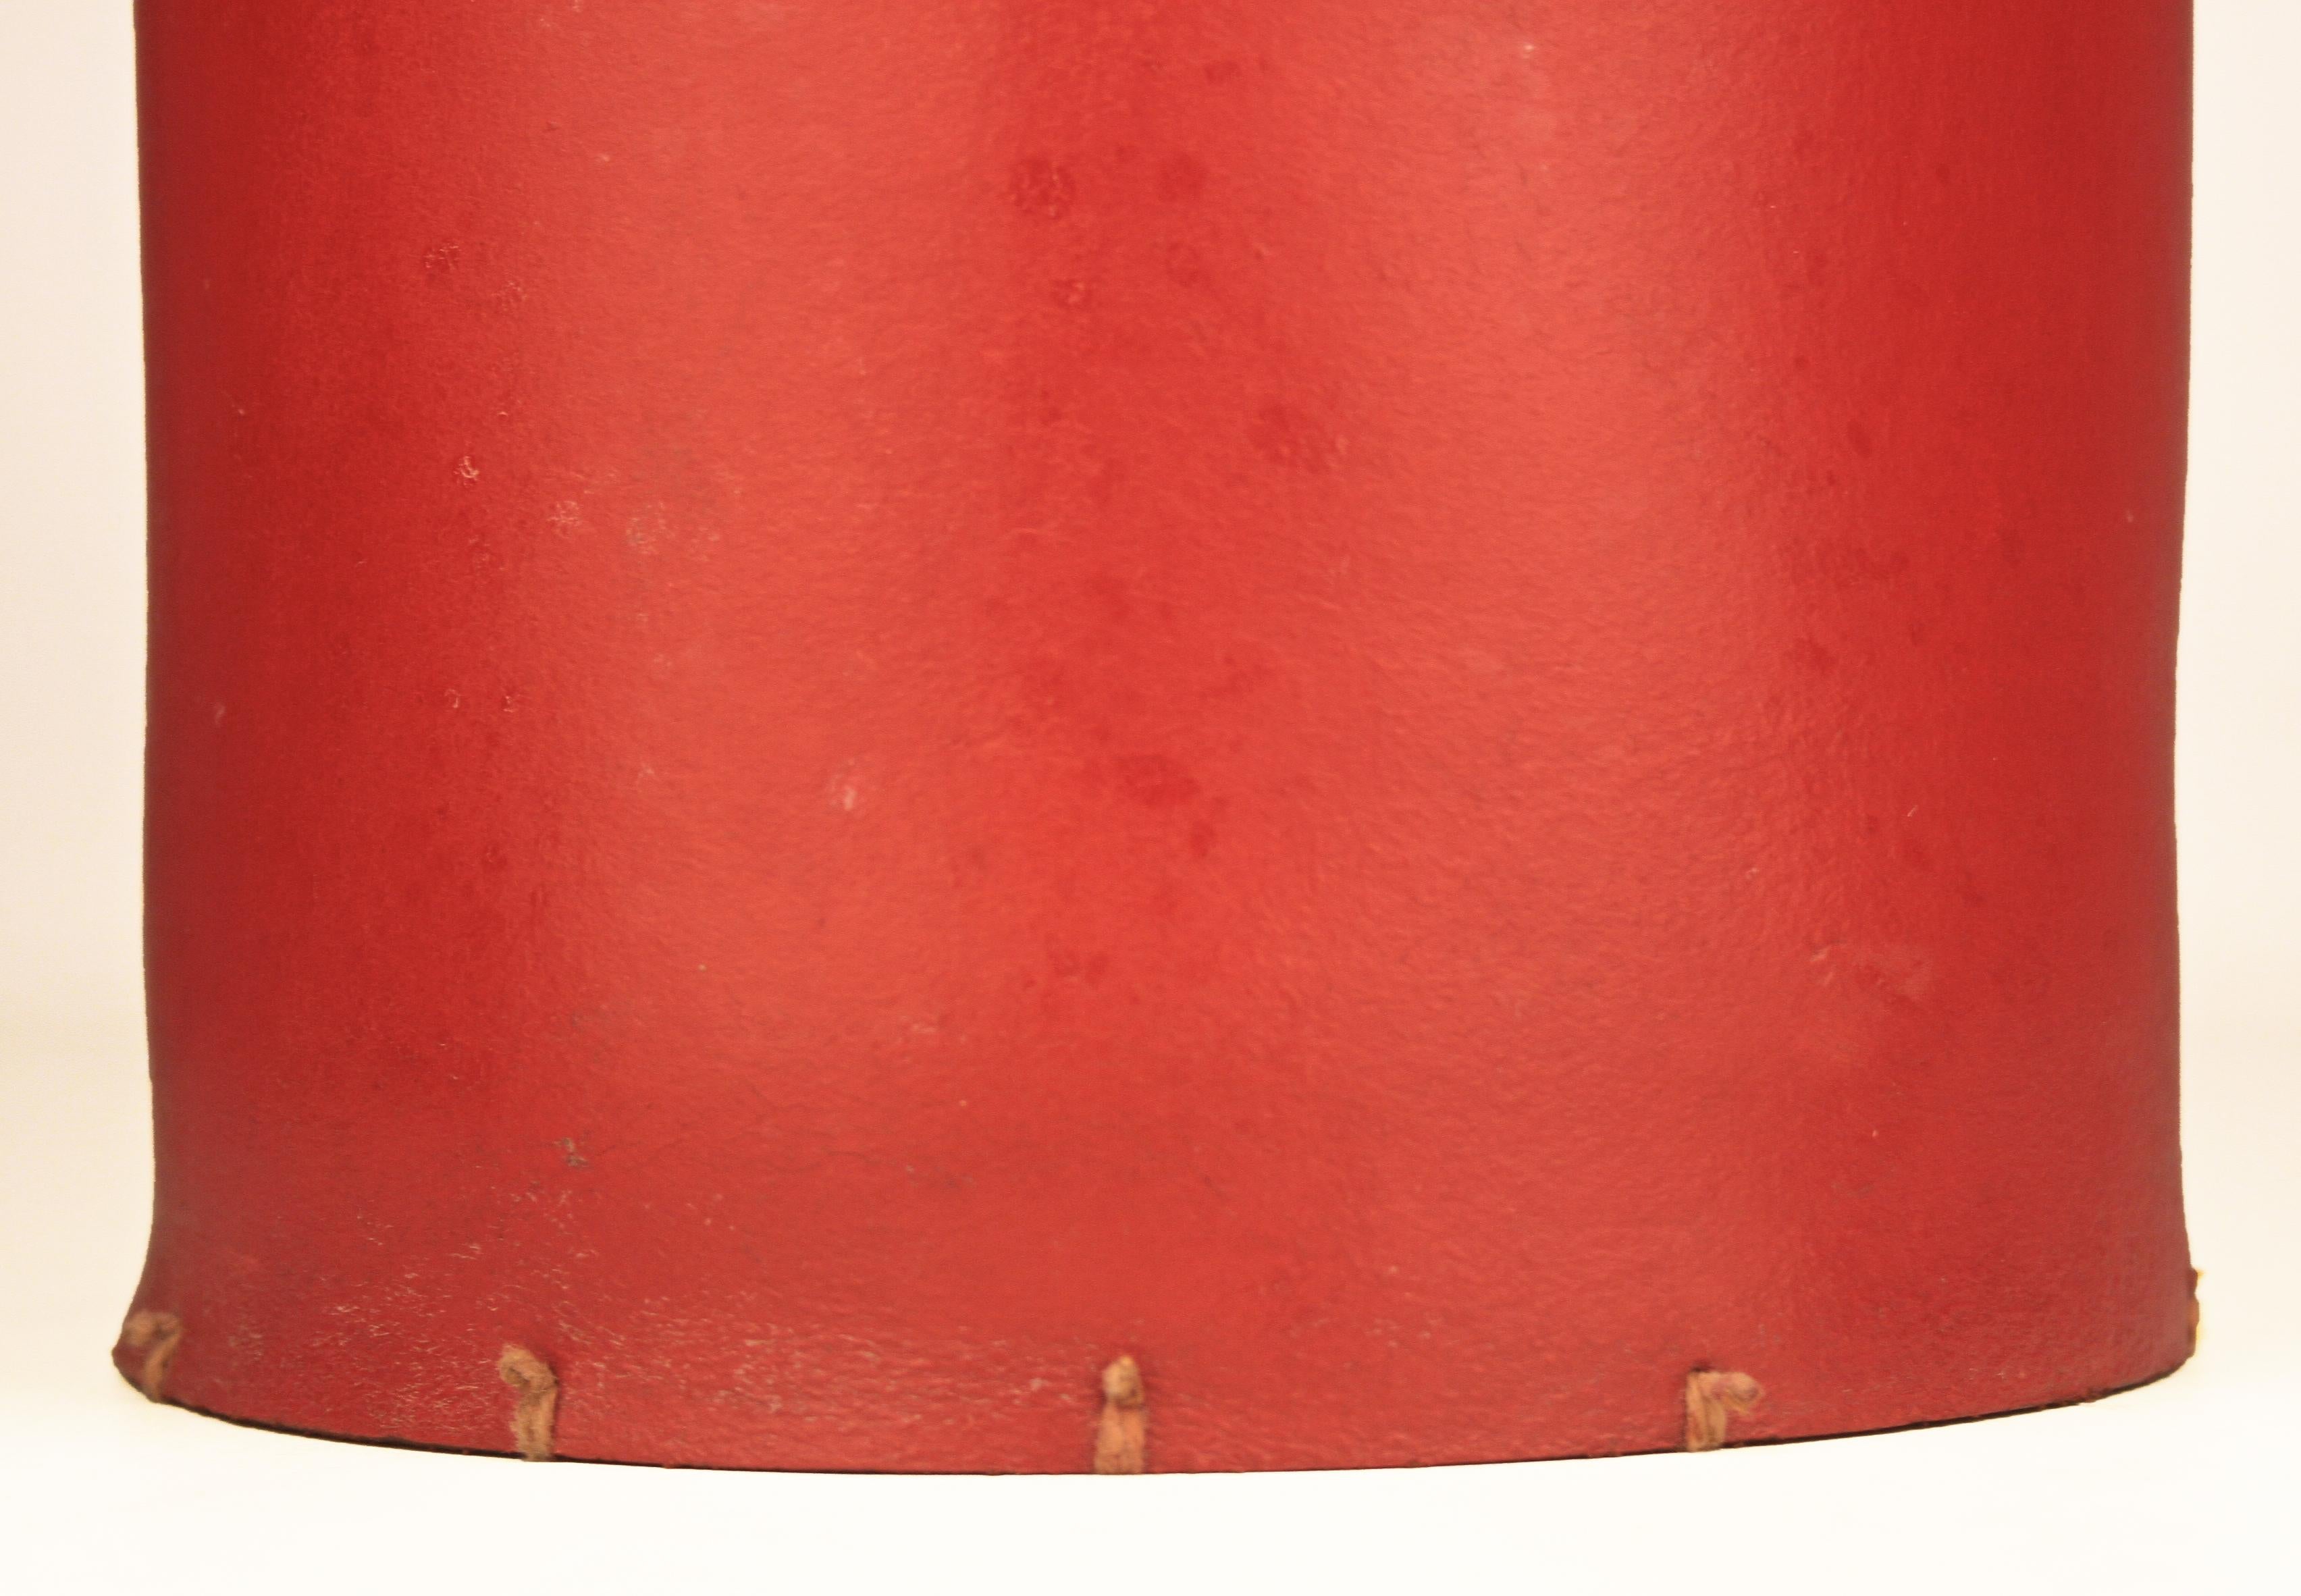 Mid-20th C. Modern French Red Leather Cylindrical Umbrella Stand by Hermès Paris For Sale 4